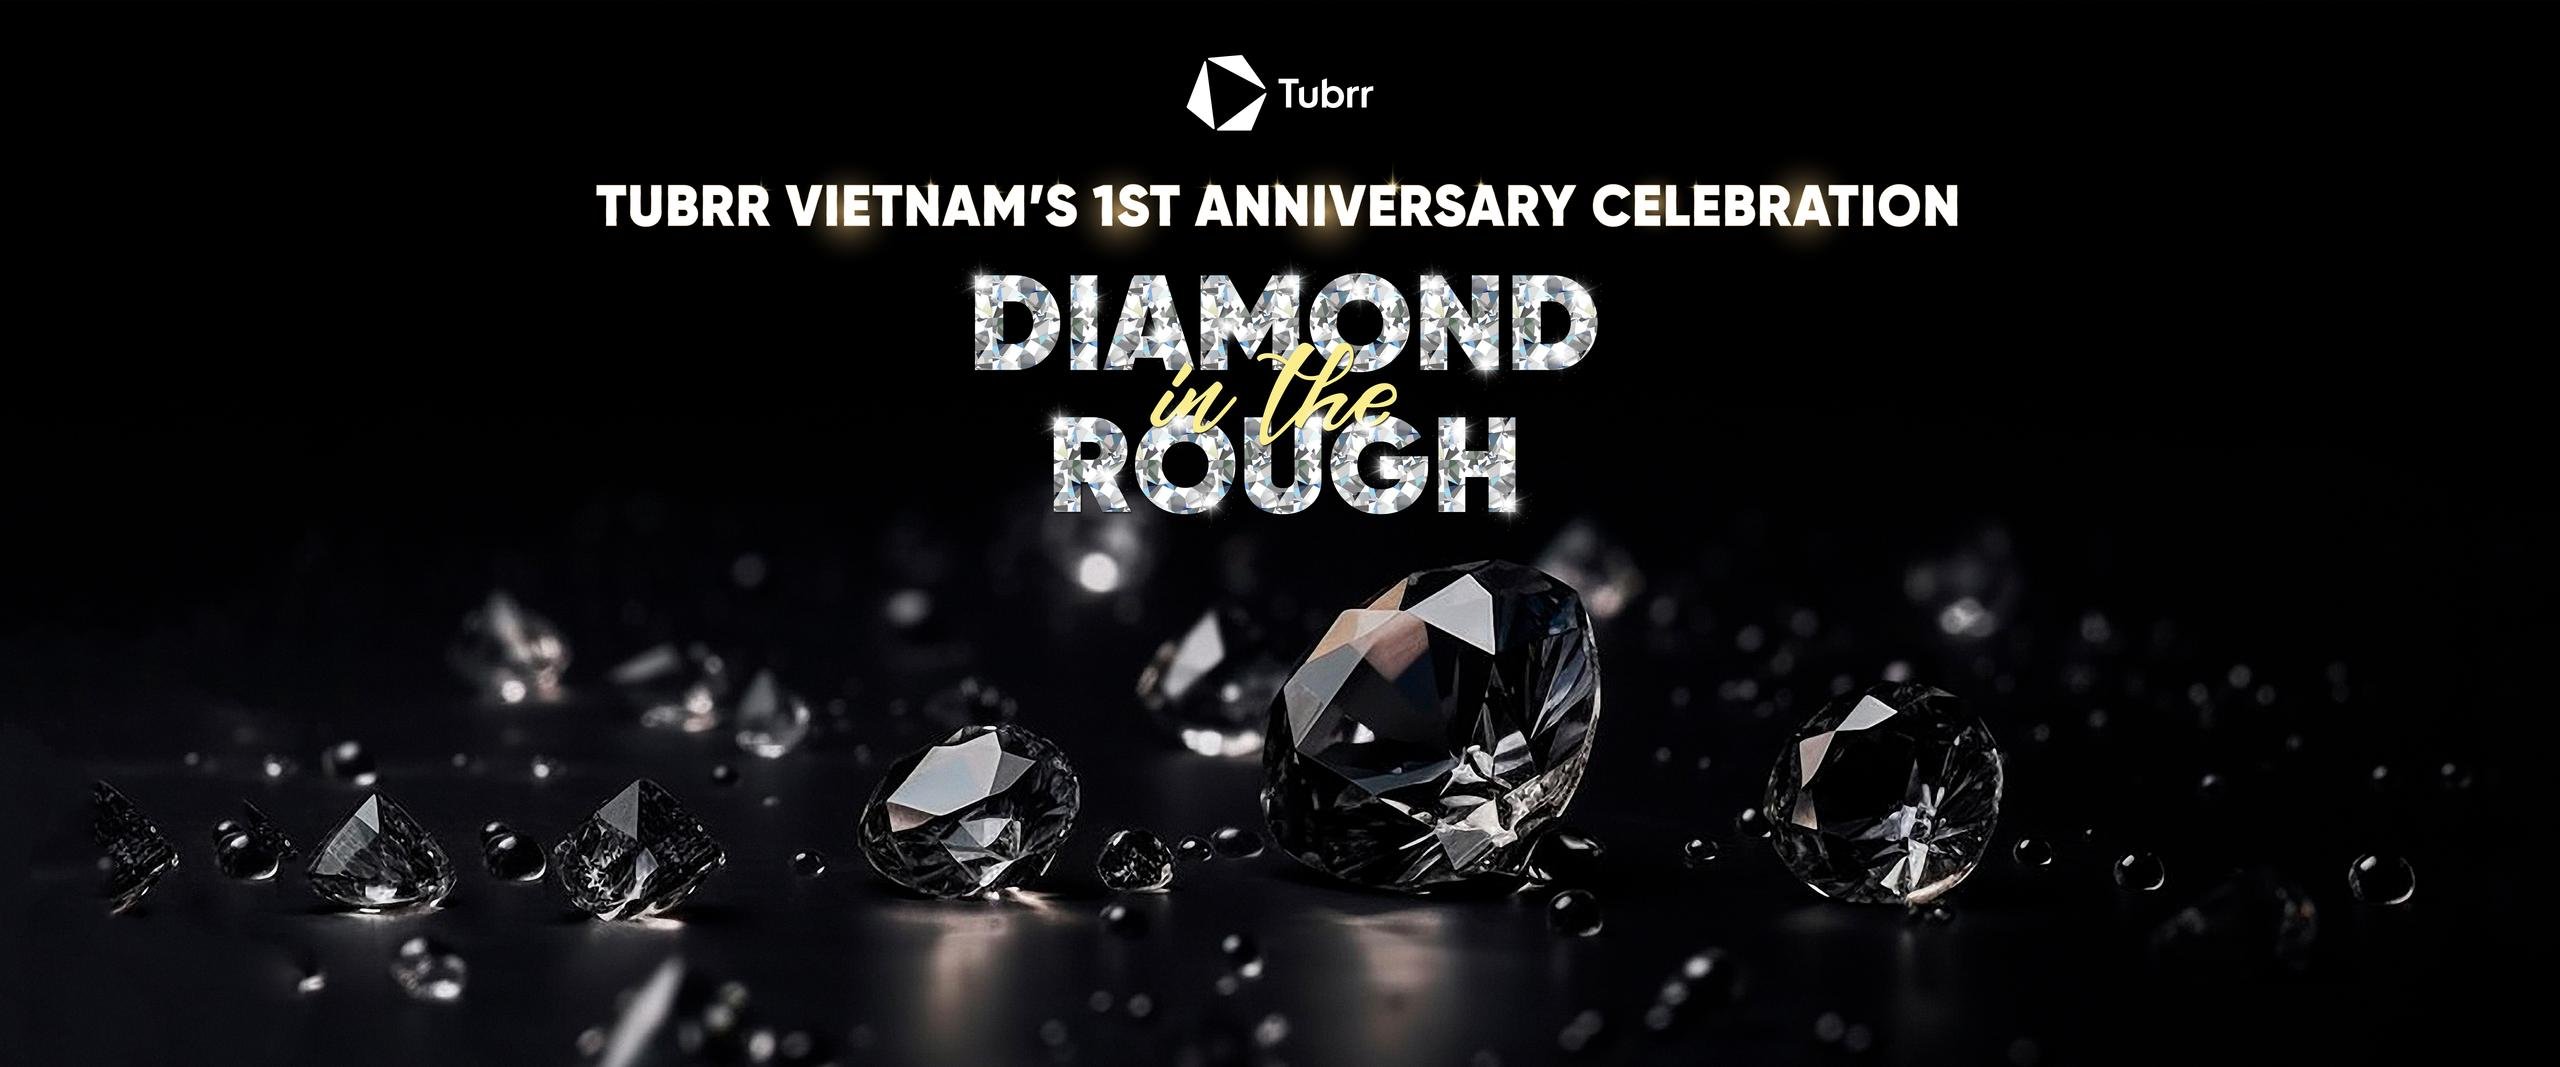 Tubrr Vietnam's one-year journey of searching for diamonds